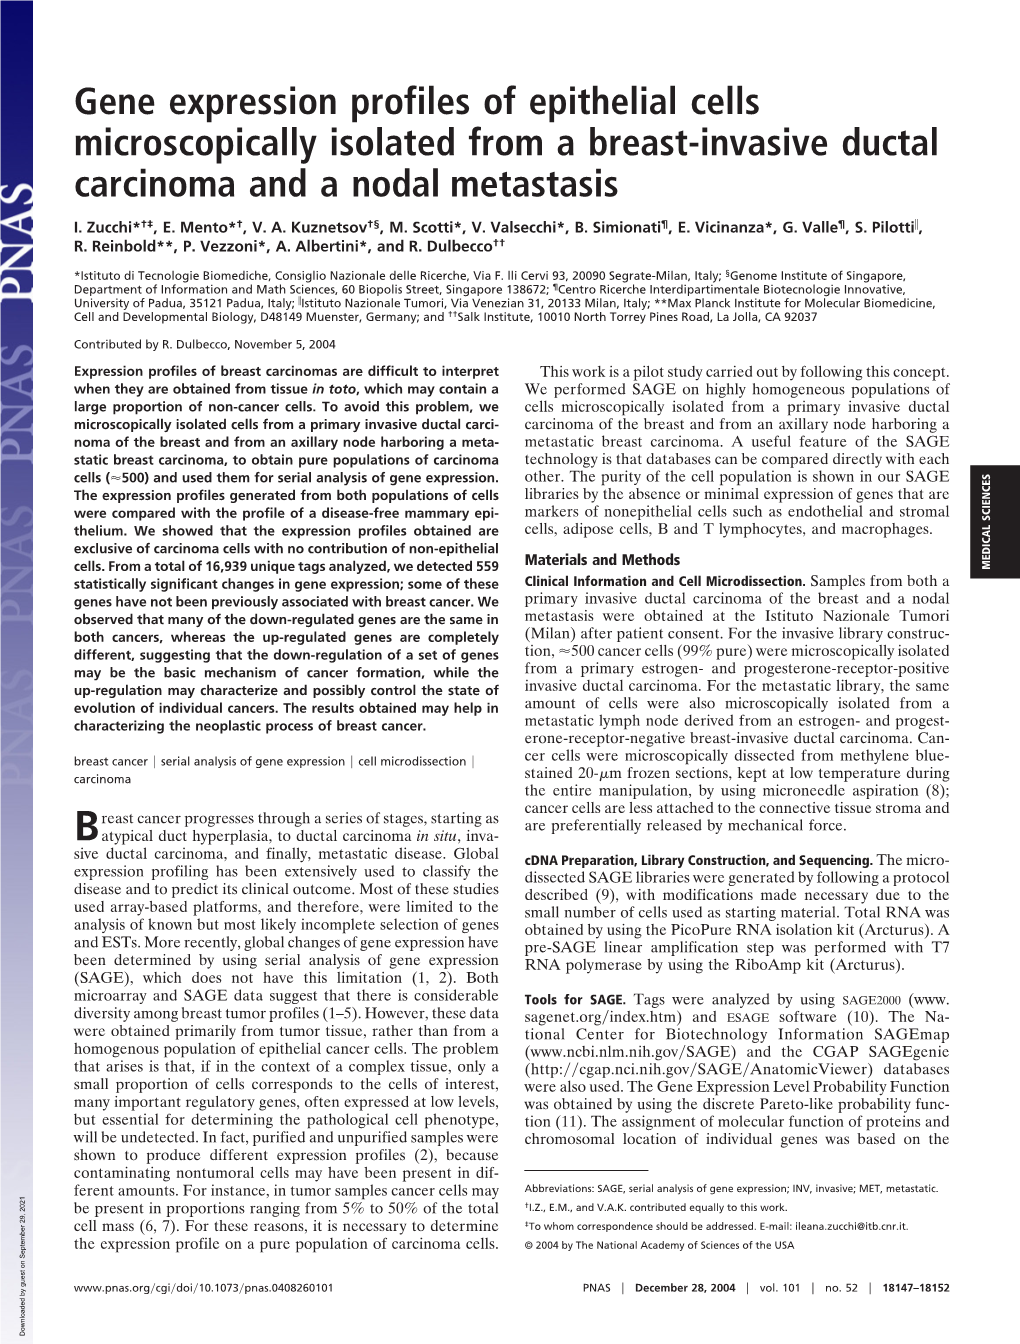 Gene Expression Profiles of Epithelial Cells Microscopically Isolated from a Breast-Invasive Ductal Carcinoma and a Nodal Metastasis